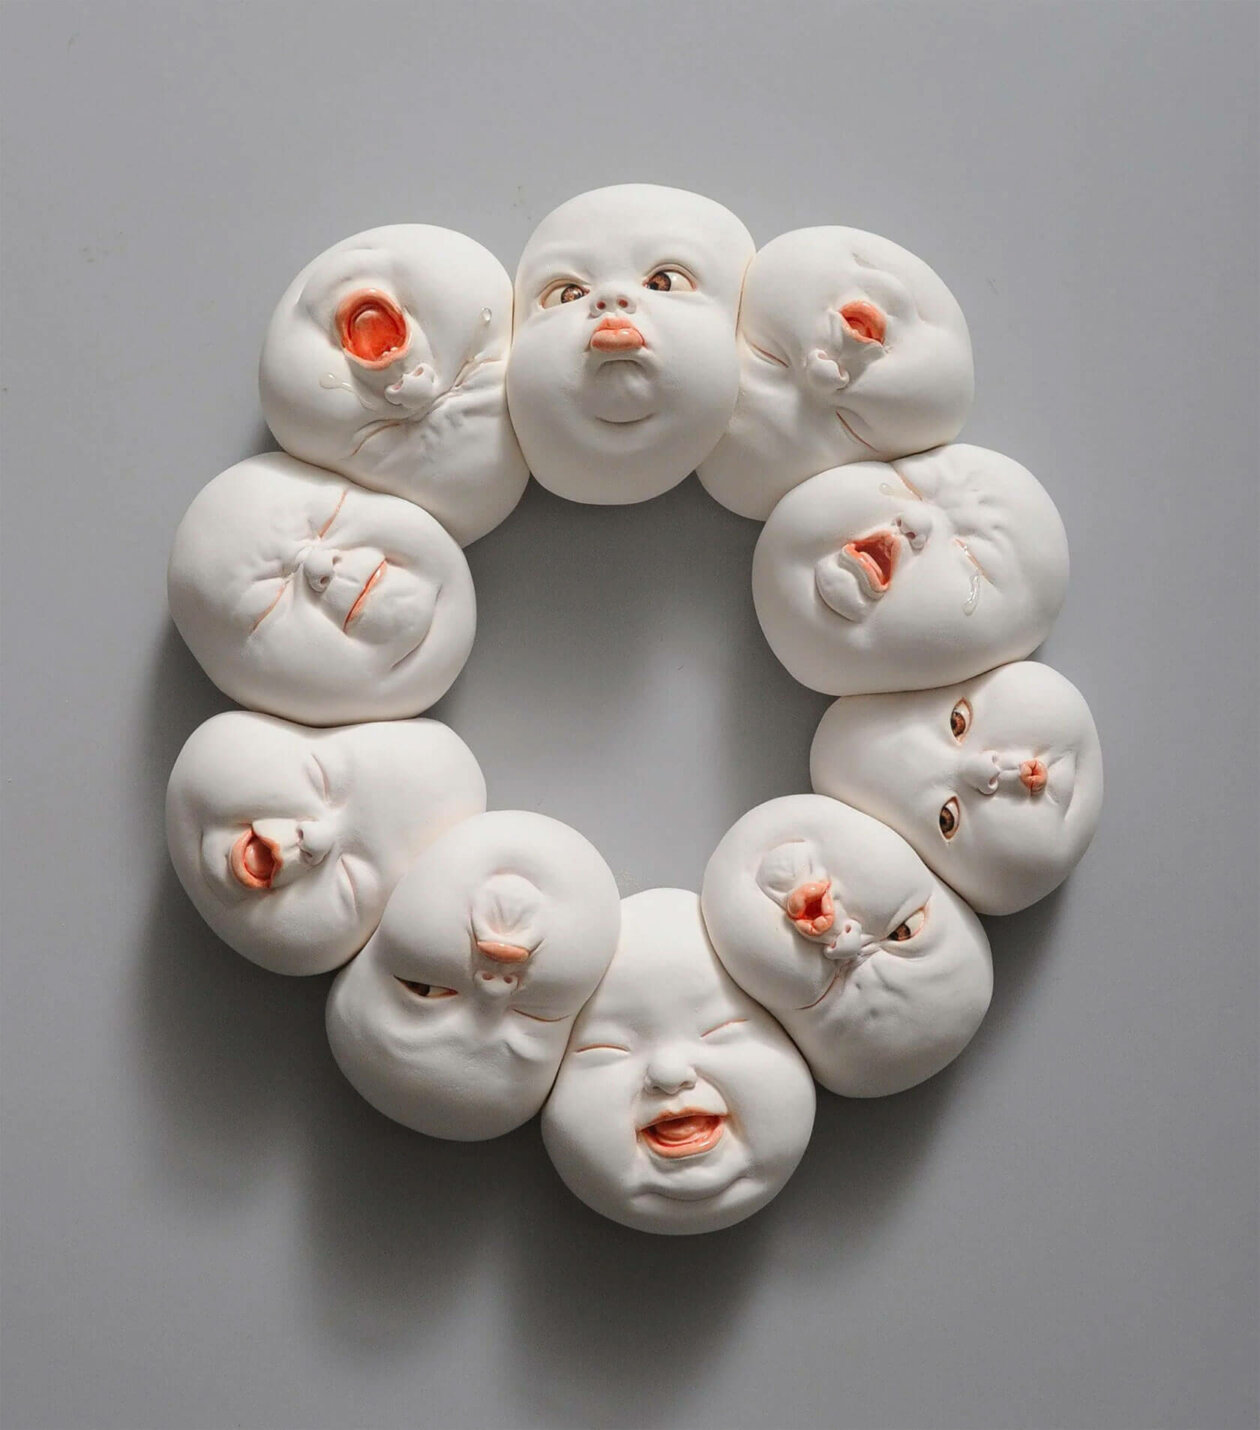 Distorted Baby Faces, Surreal Ceramic Sculptures By Johnson Tsang (20)